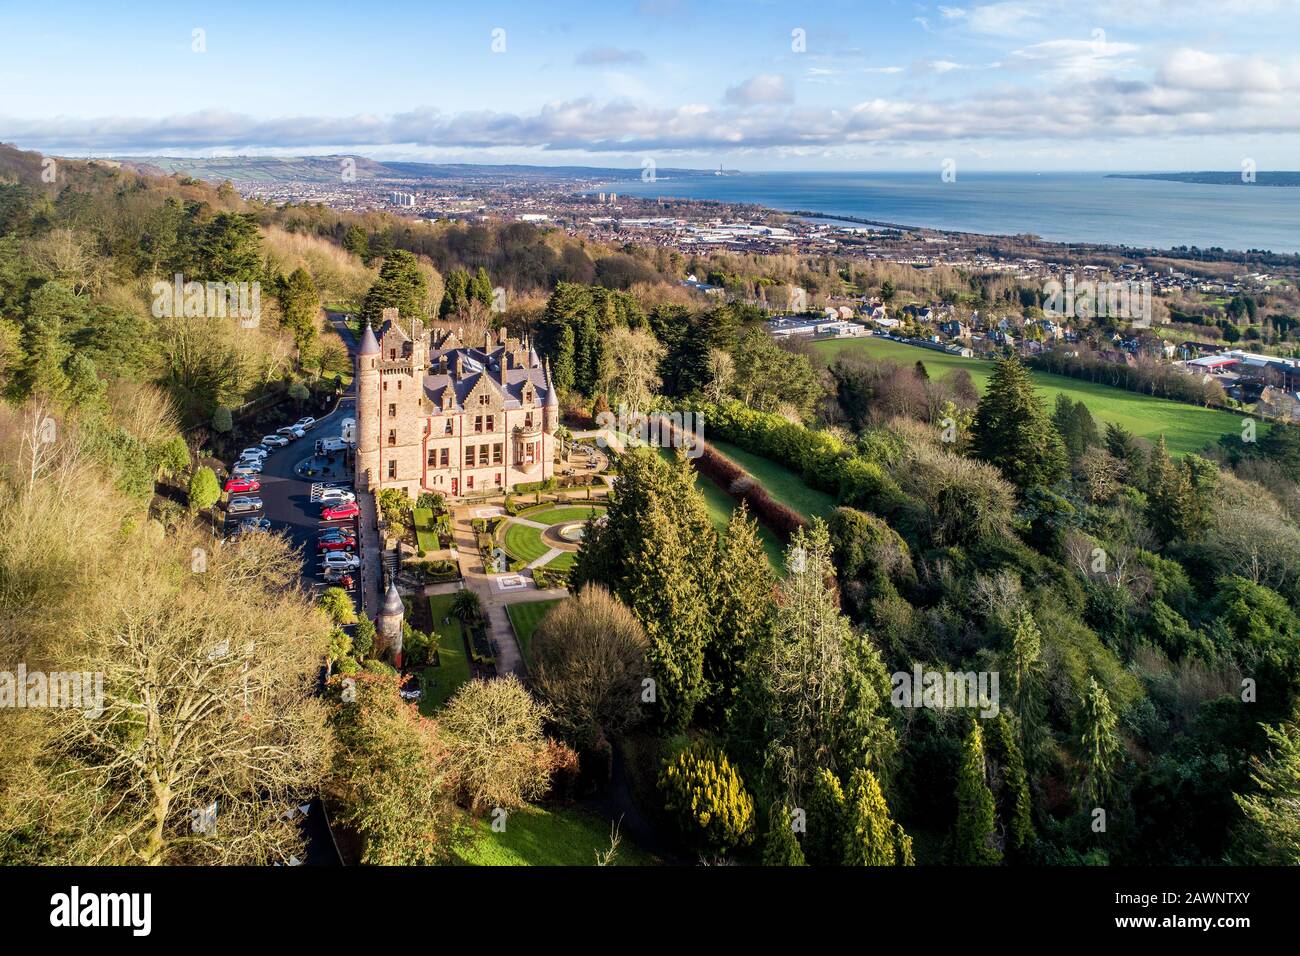 Belfast castle. Tourist attraction on the slopes of Cave Hill Country Park in Belfast, Northern Ireland. Aerial view. Belfast Lough and city in the ba Stock Photo